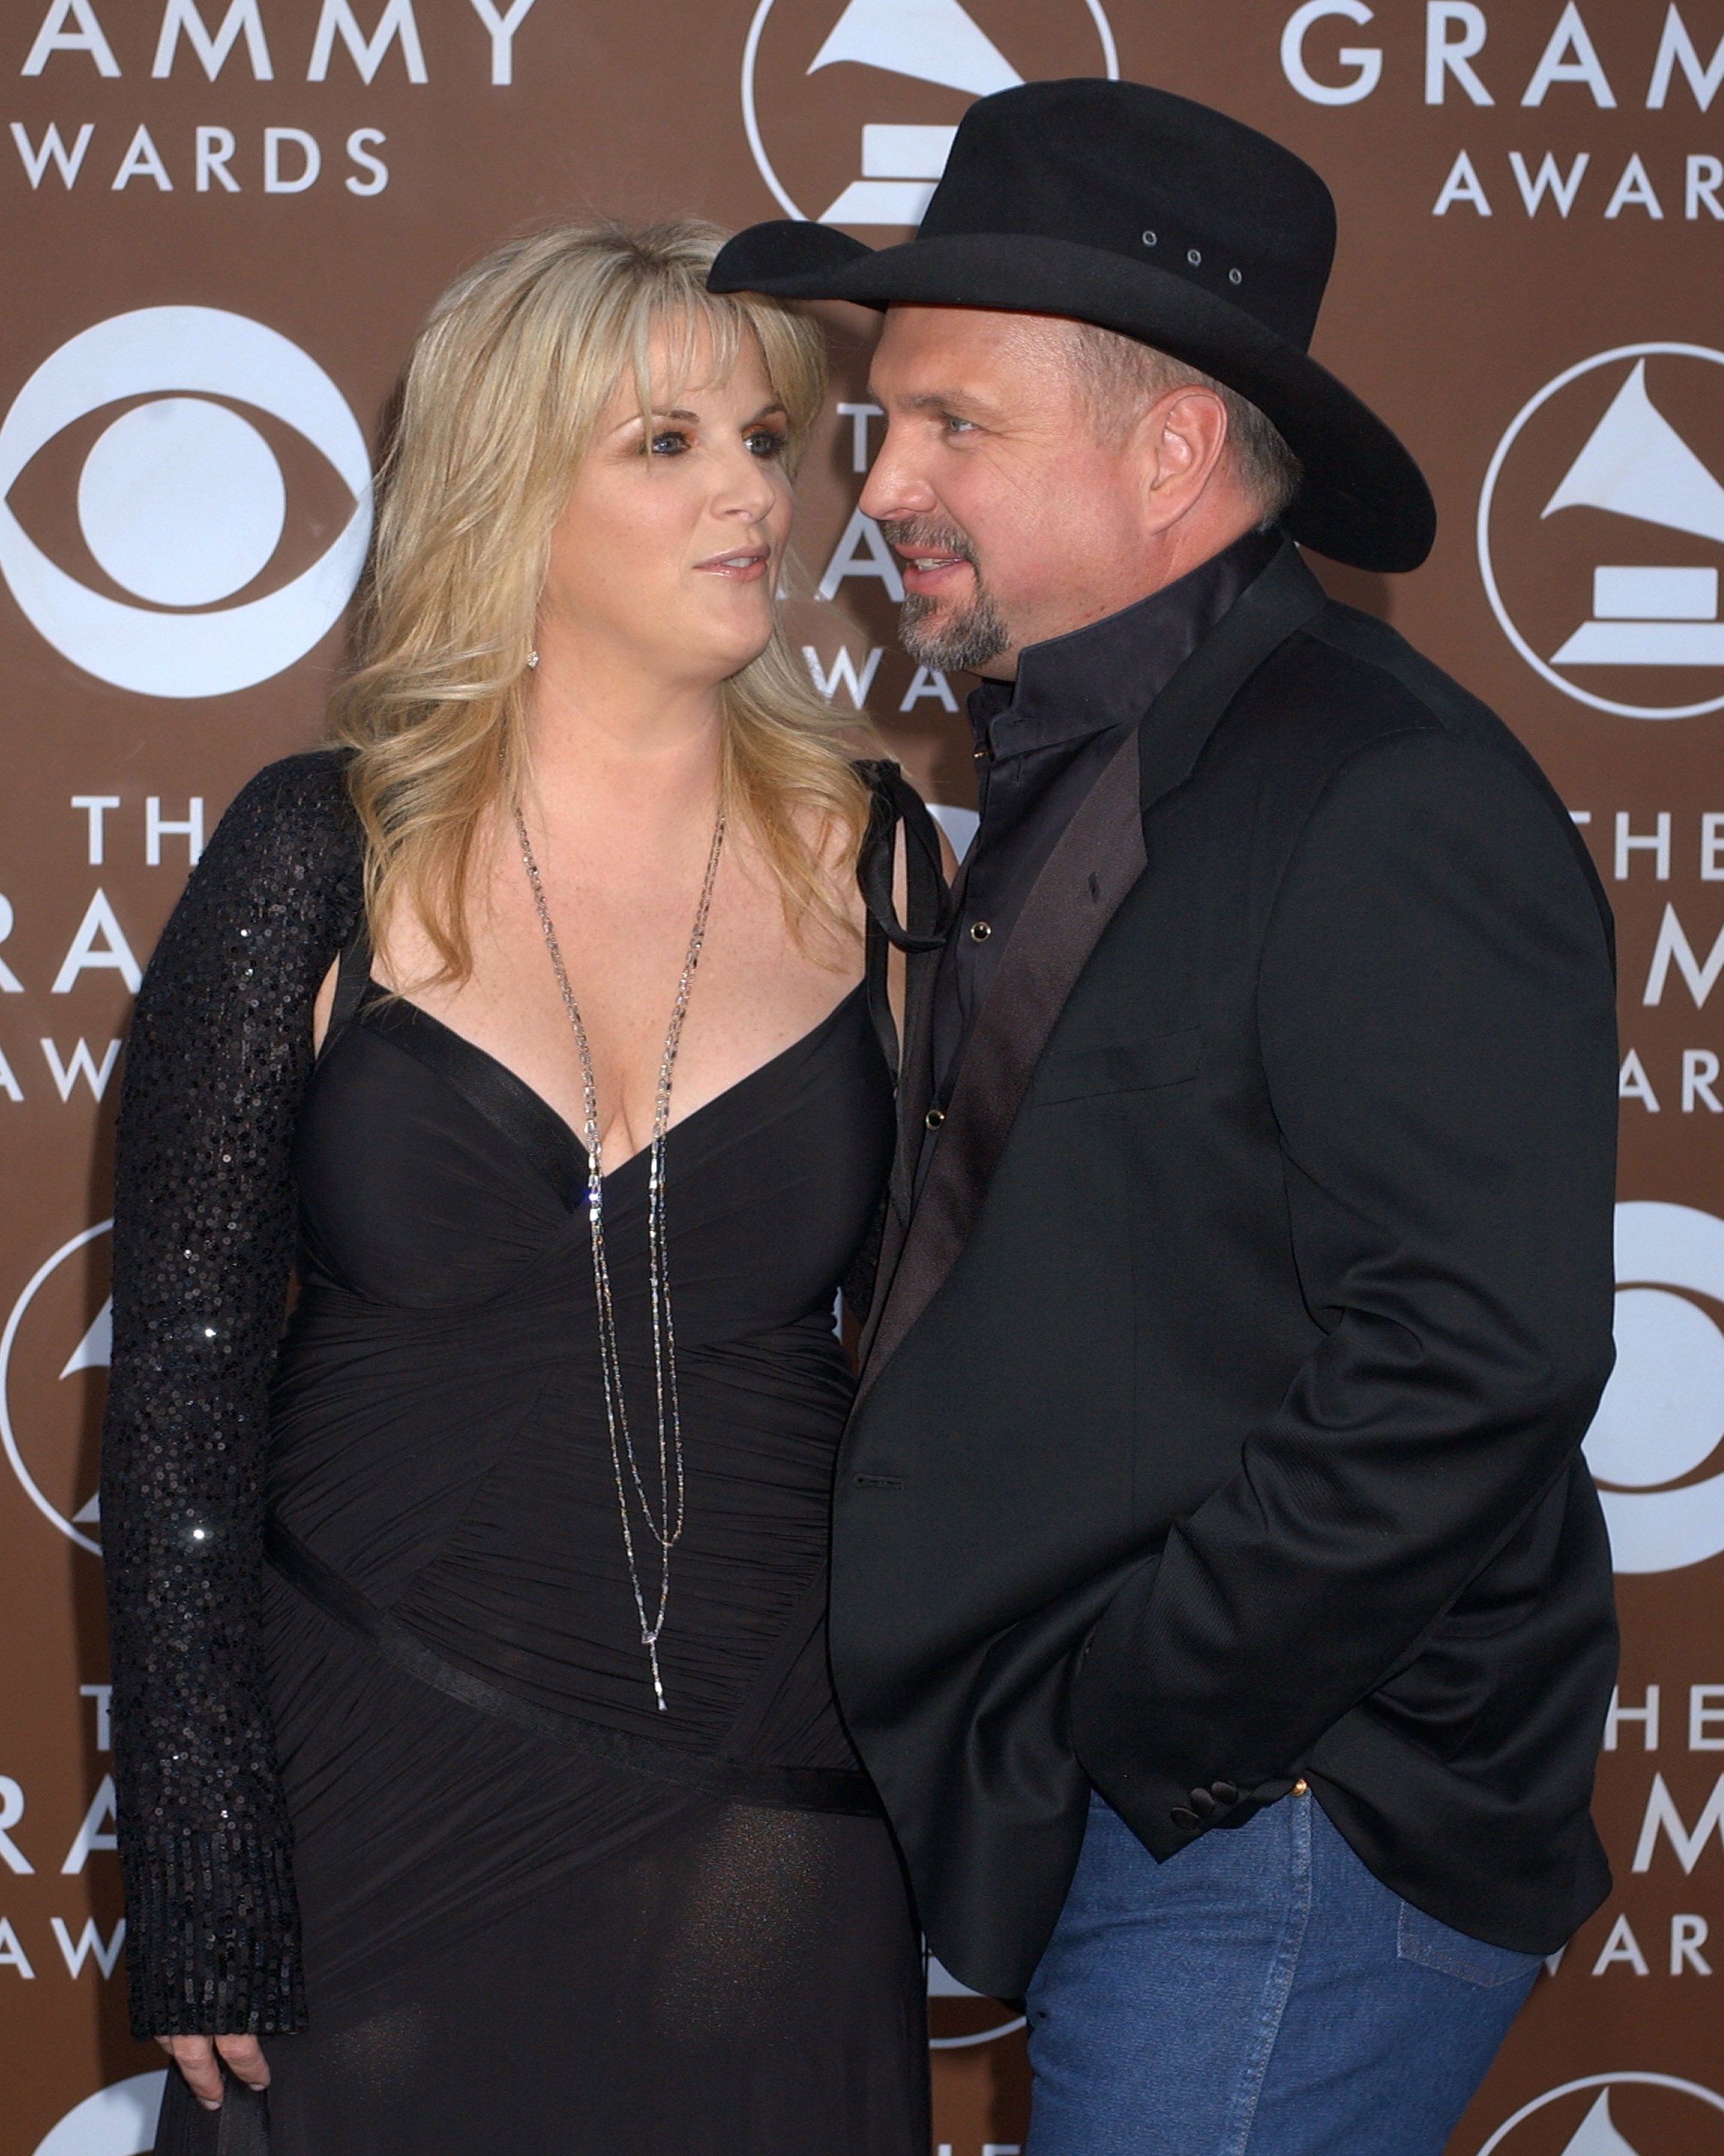 Trisha Yearwood and Garth Brooks at the 48th Grammy Awards show on February 08, 2006 | Source: Getty Images